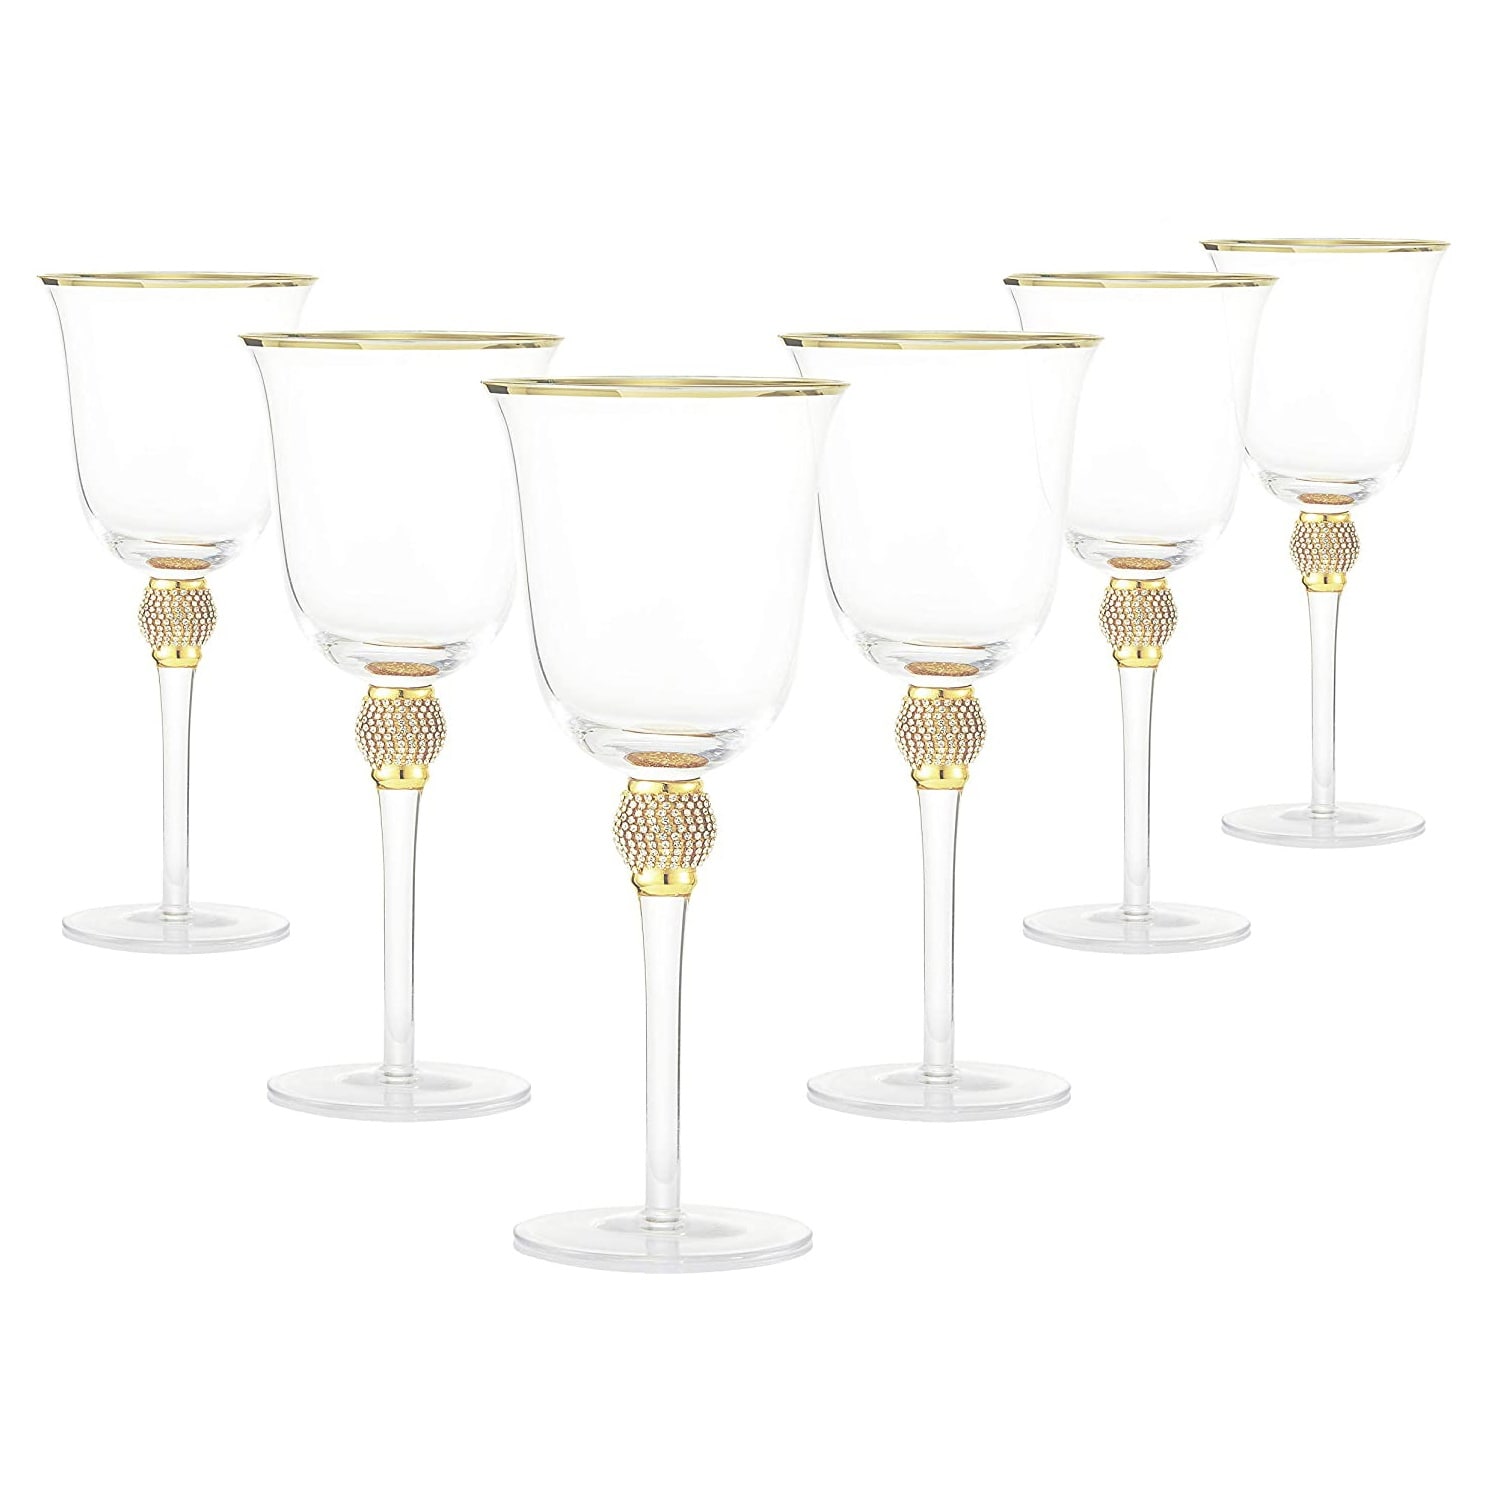 https://ak1.ostkcdn.com/images/products/is/images/direct/ee298c5f0c6d75f43fb860349fb48db19f9dd99d/Berkware-Elegant-Sparkling-Studded-Long-Stem-Rose-Glass-with-Gold-or-Silver-Rim.jpg